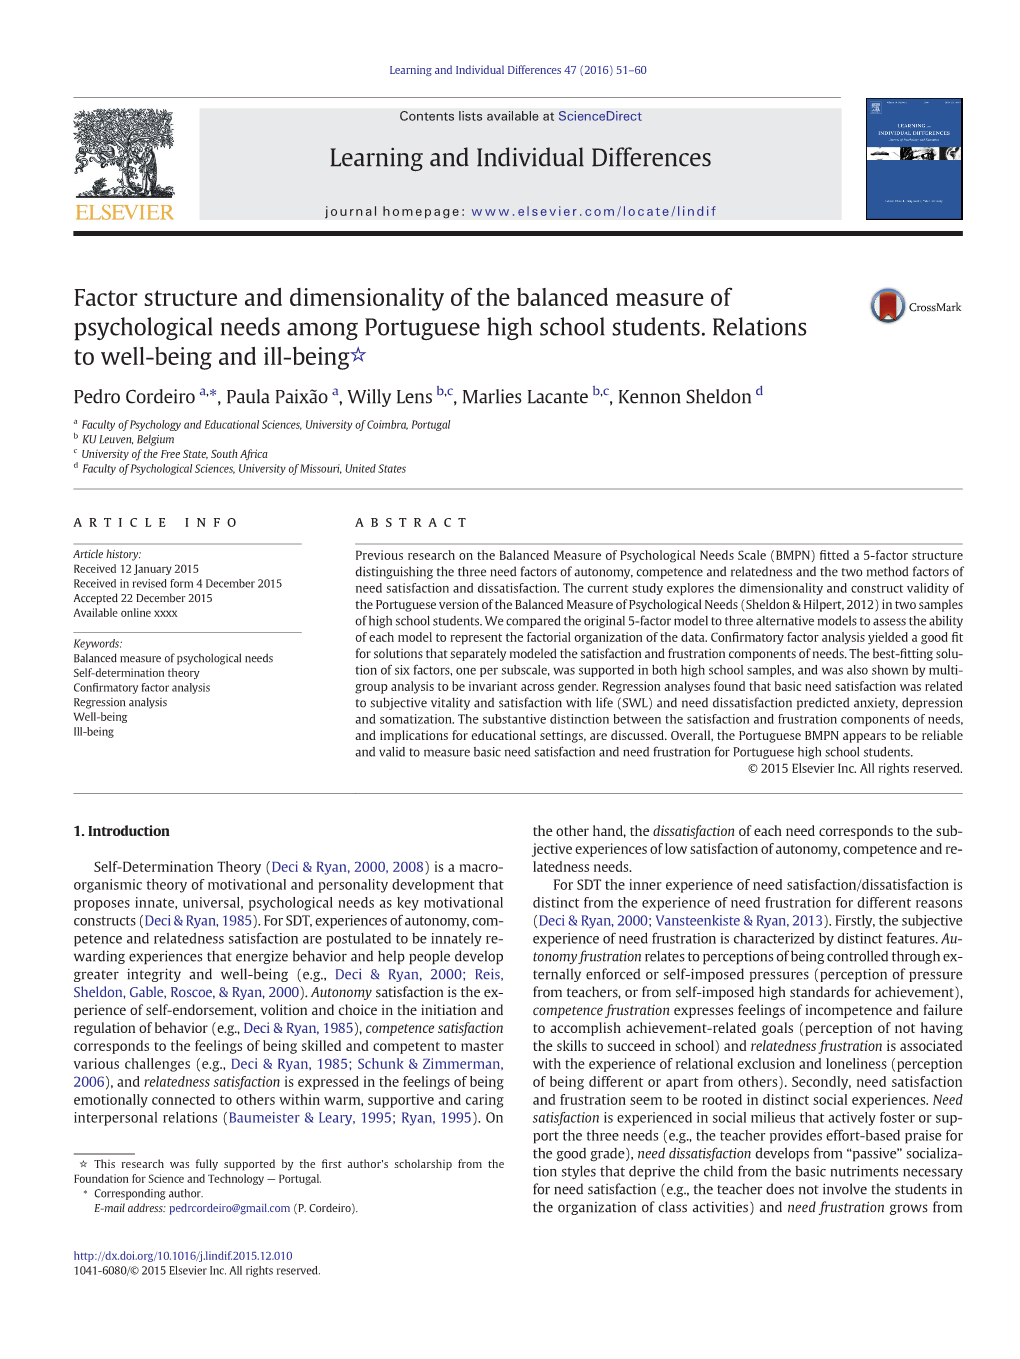 Factor Structure and Dimensionality of the Balanced Measure of Psychological Needs Among Portuguese High School Students